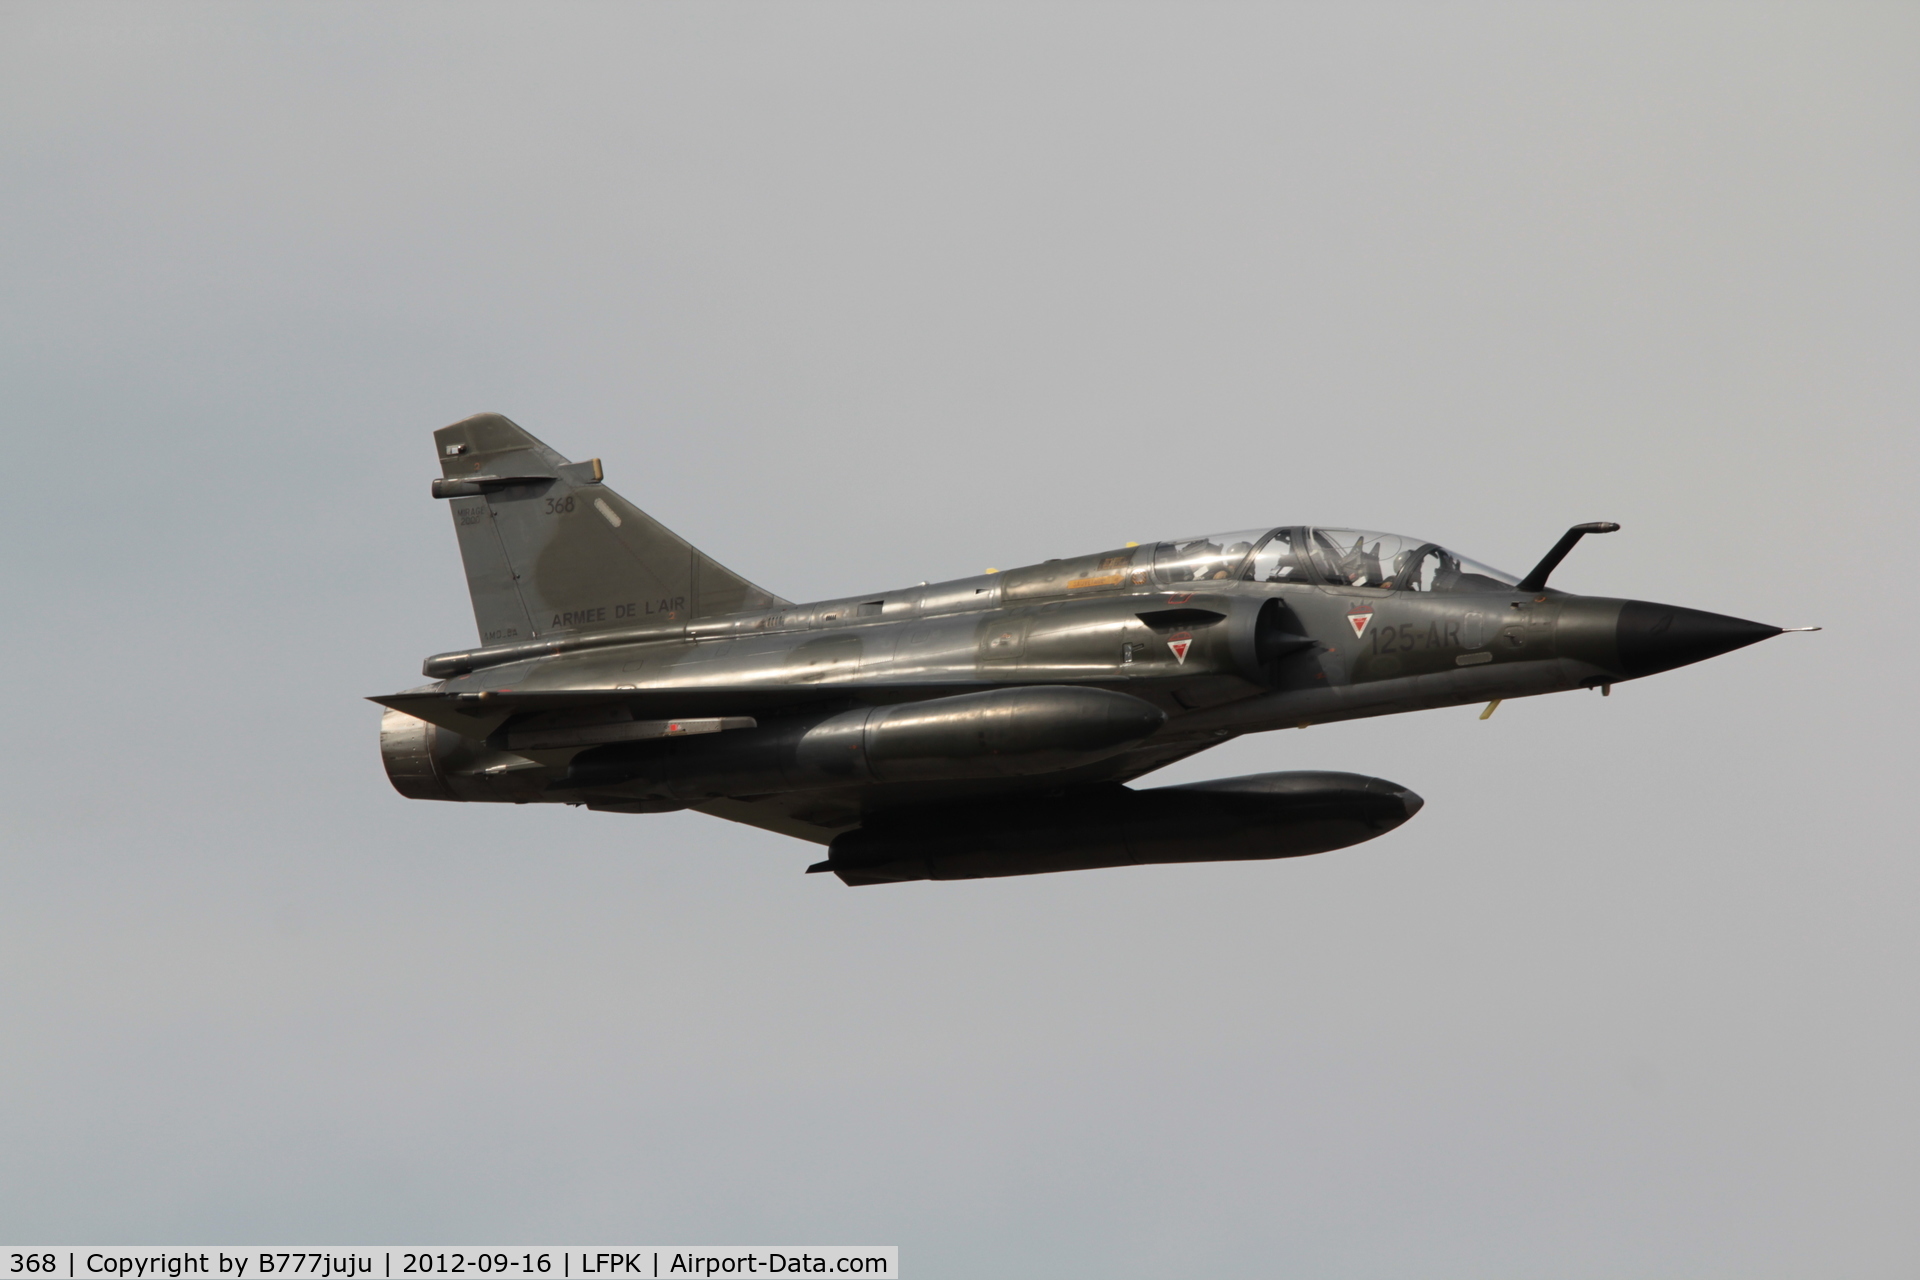 368, Dassault Mirage 2000N C/N 364, at Coulommiers